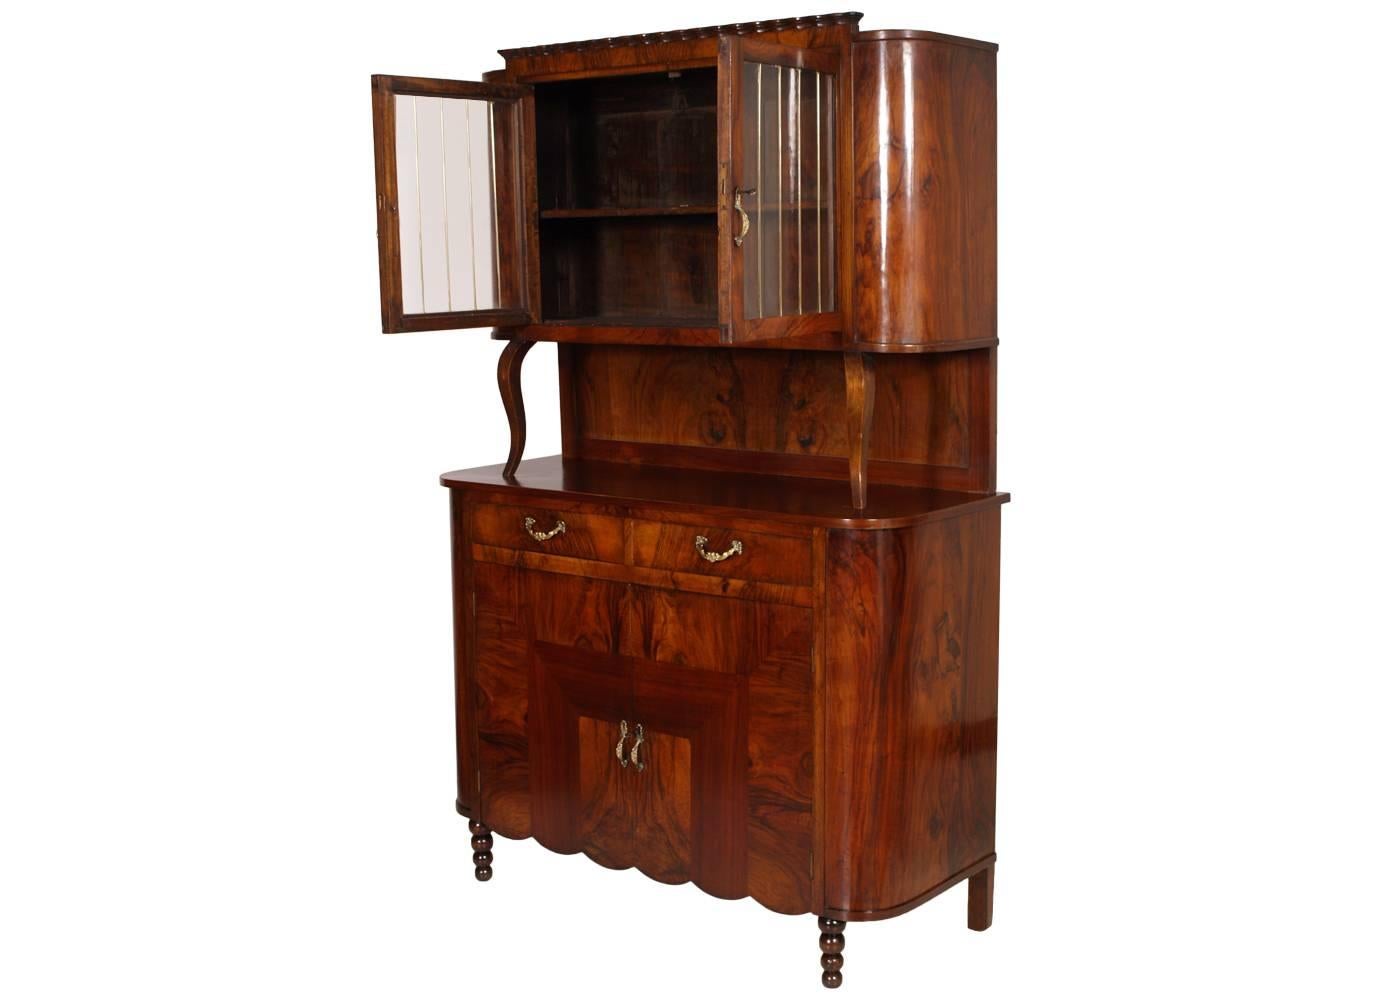 Early 20th century
Credenza vitrine Art Nouveau walnut and burl walnut by Meroni & Fossati Lissone.
Precious and elegant sideboard with original antique patina, wax polished.

A. Meroni & R. Fossati - founded in 1870, it was one of the oldest and